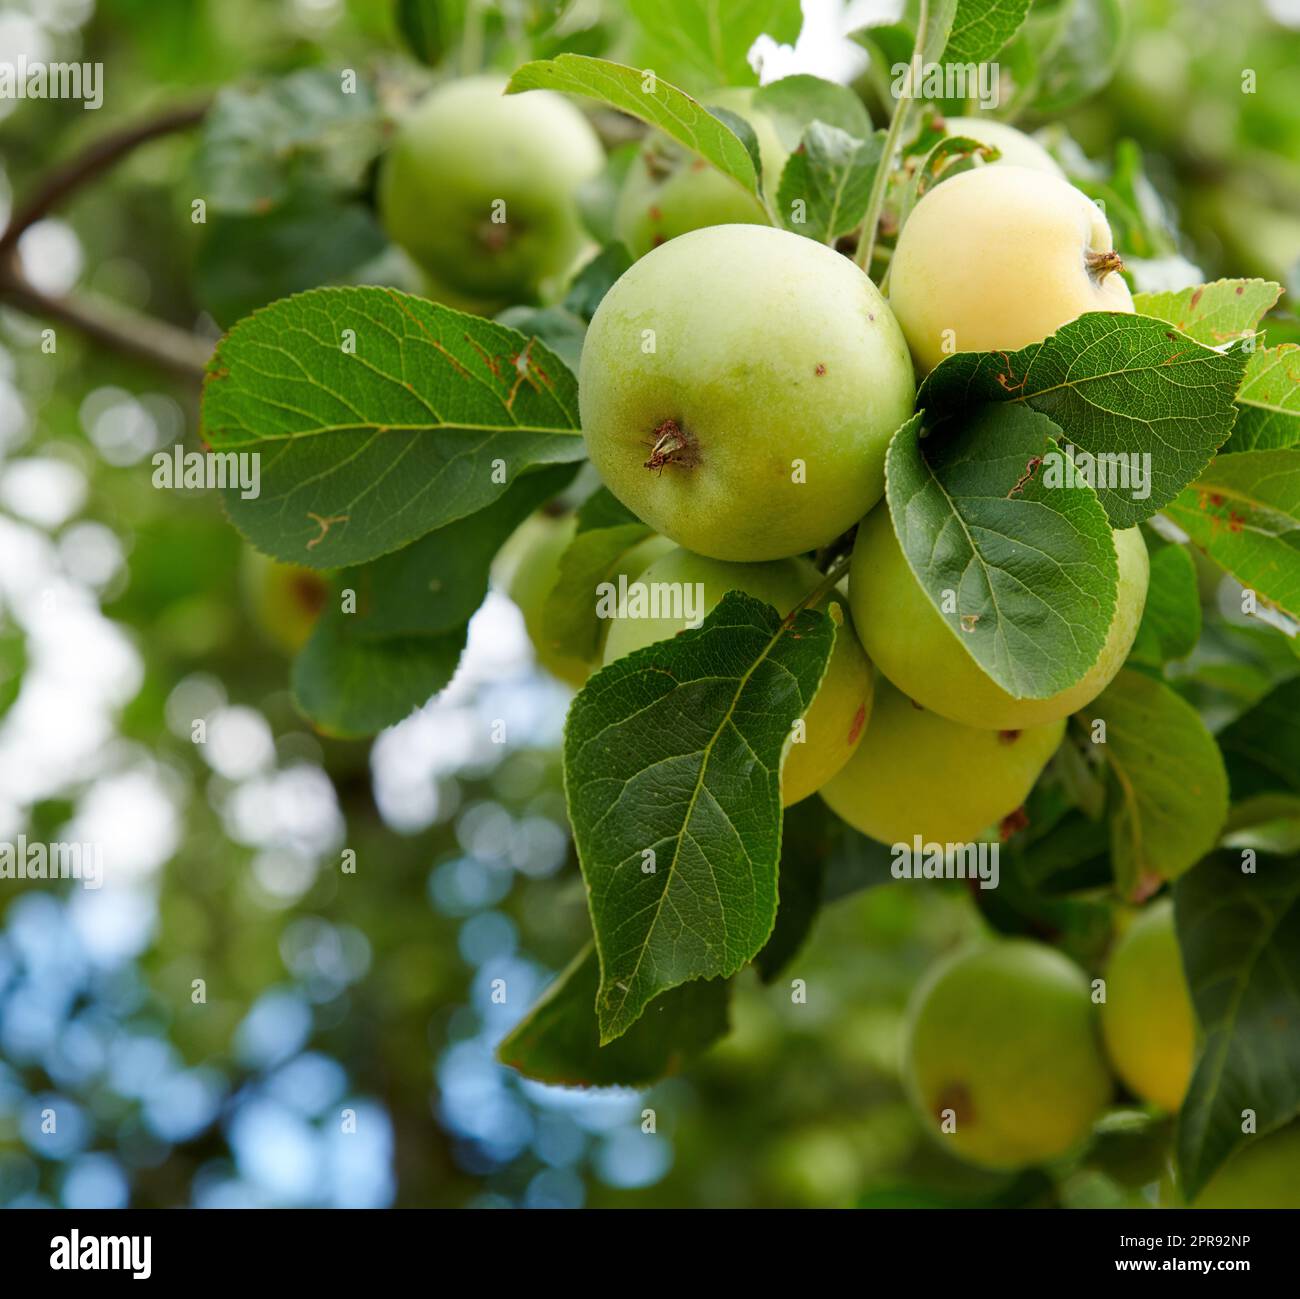 Apples in my gardenm. Fresh ripe green apples growing on tree outside. Serene and tranquil setting of nature on a bright sunny Summer day. Plant stem of fruit with green leaves around apples on farm. Stock Photo